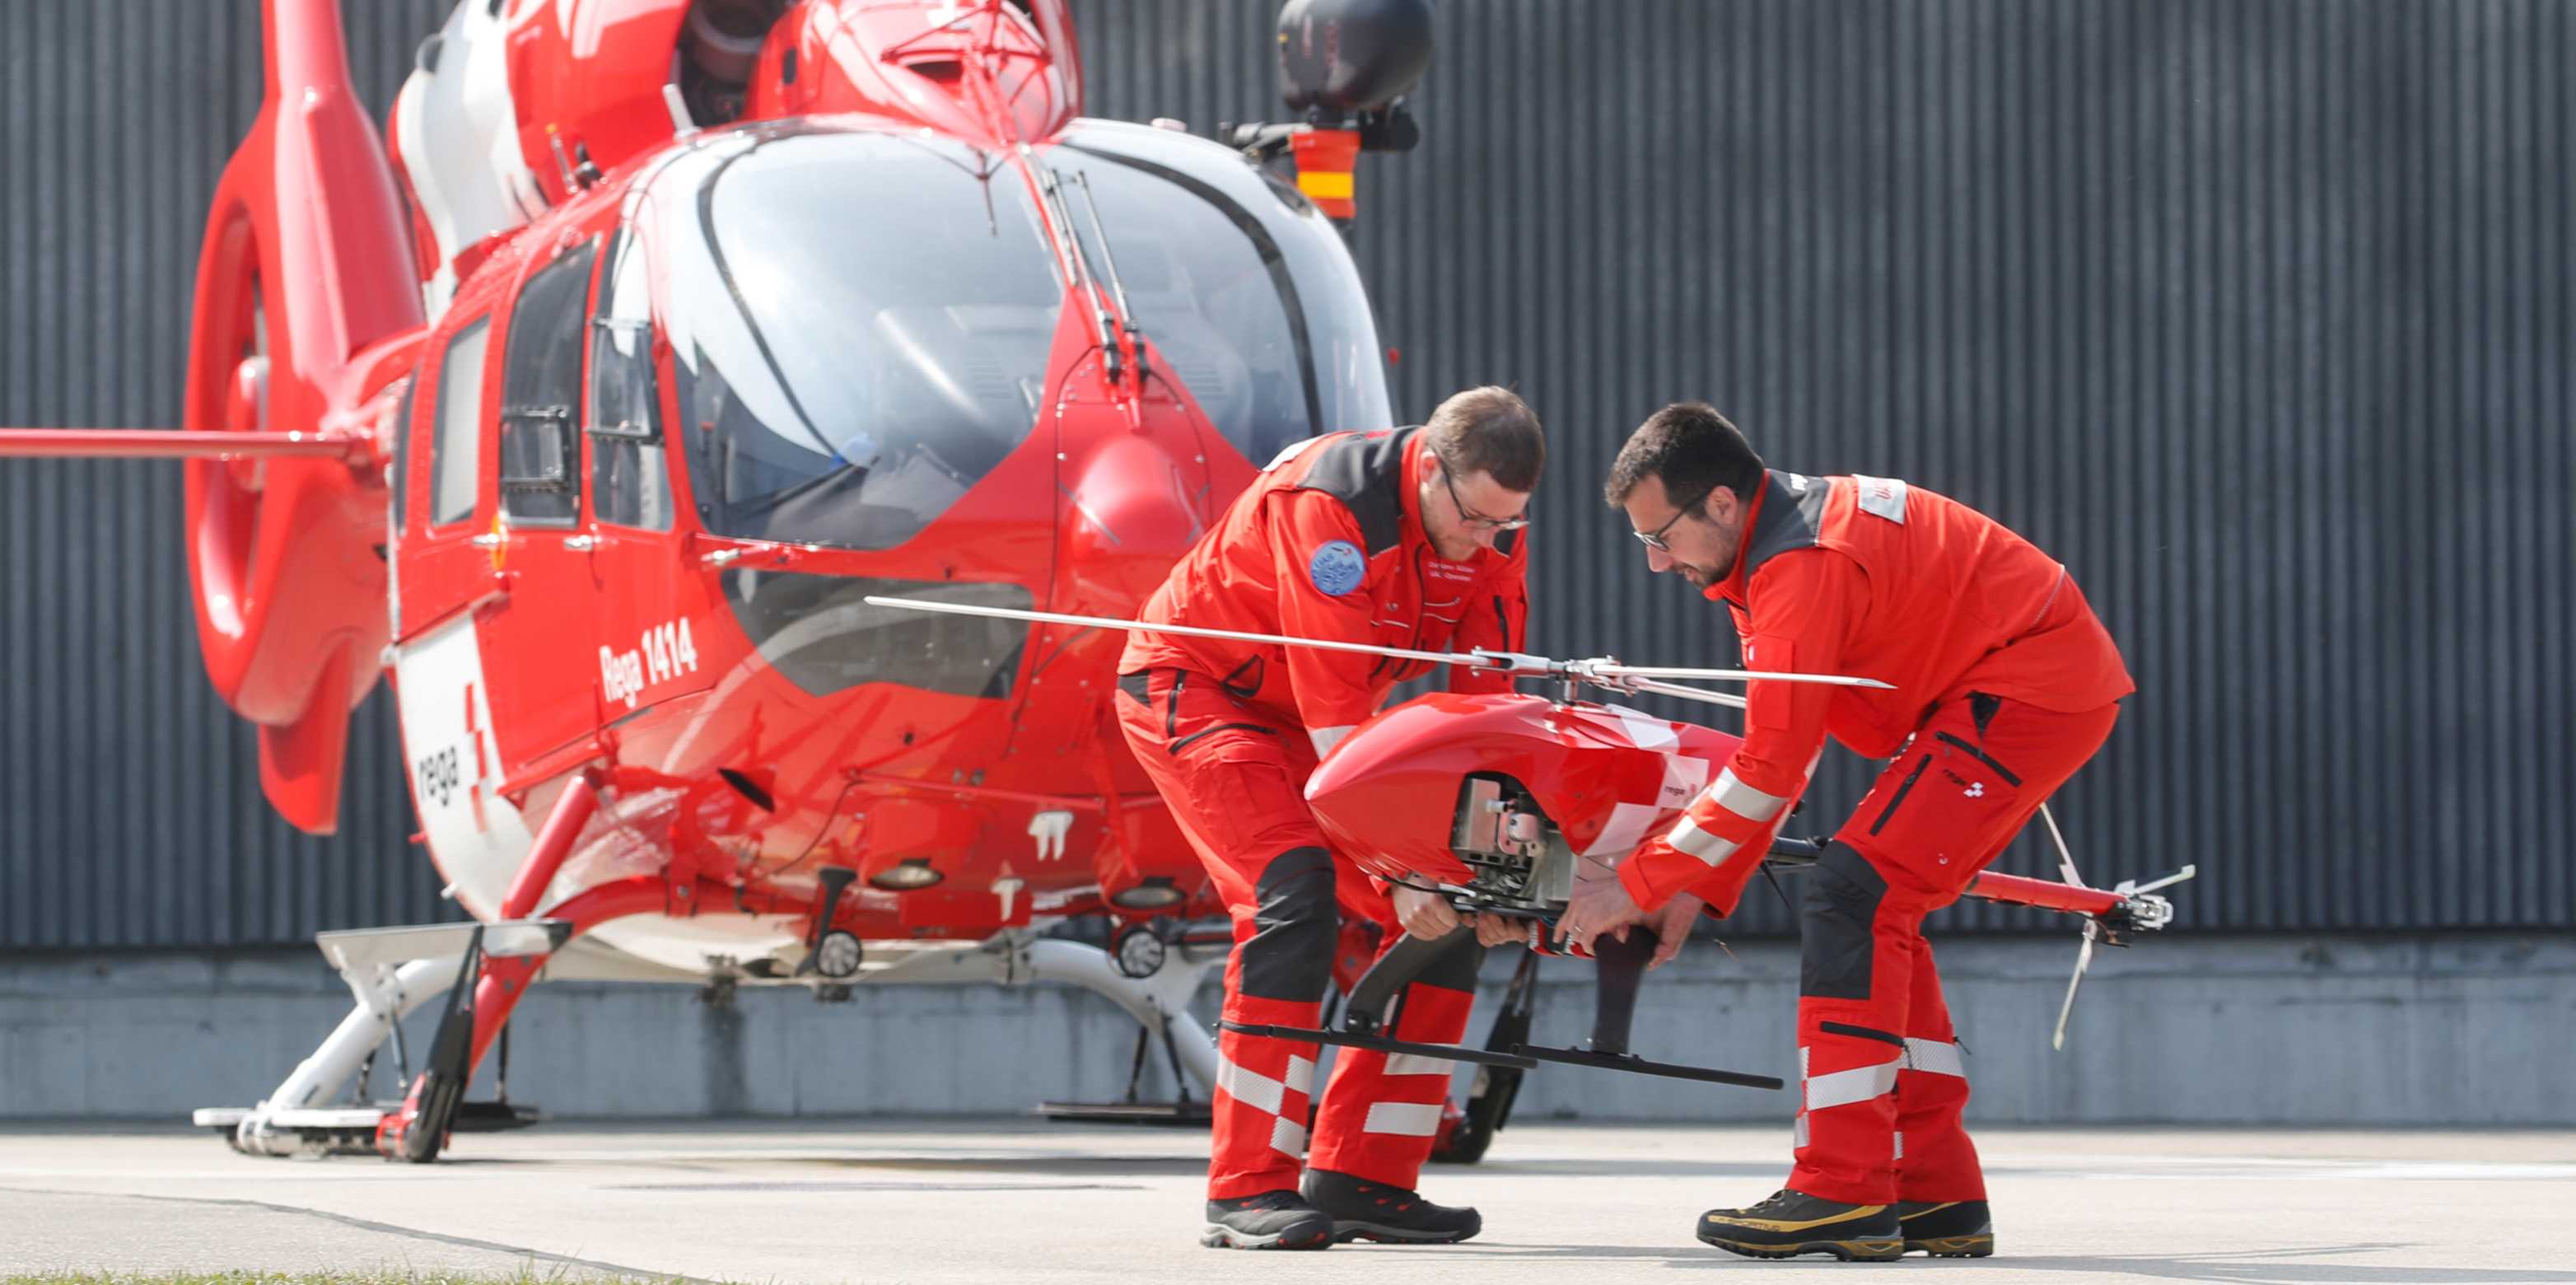 Drone operator Corti of Swiss air rescue company Rega and Maeder of Oblivion Aerial company place the new Rega-Drone in front of a rescue helicopter in Duebendorf.